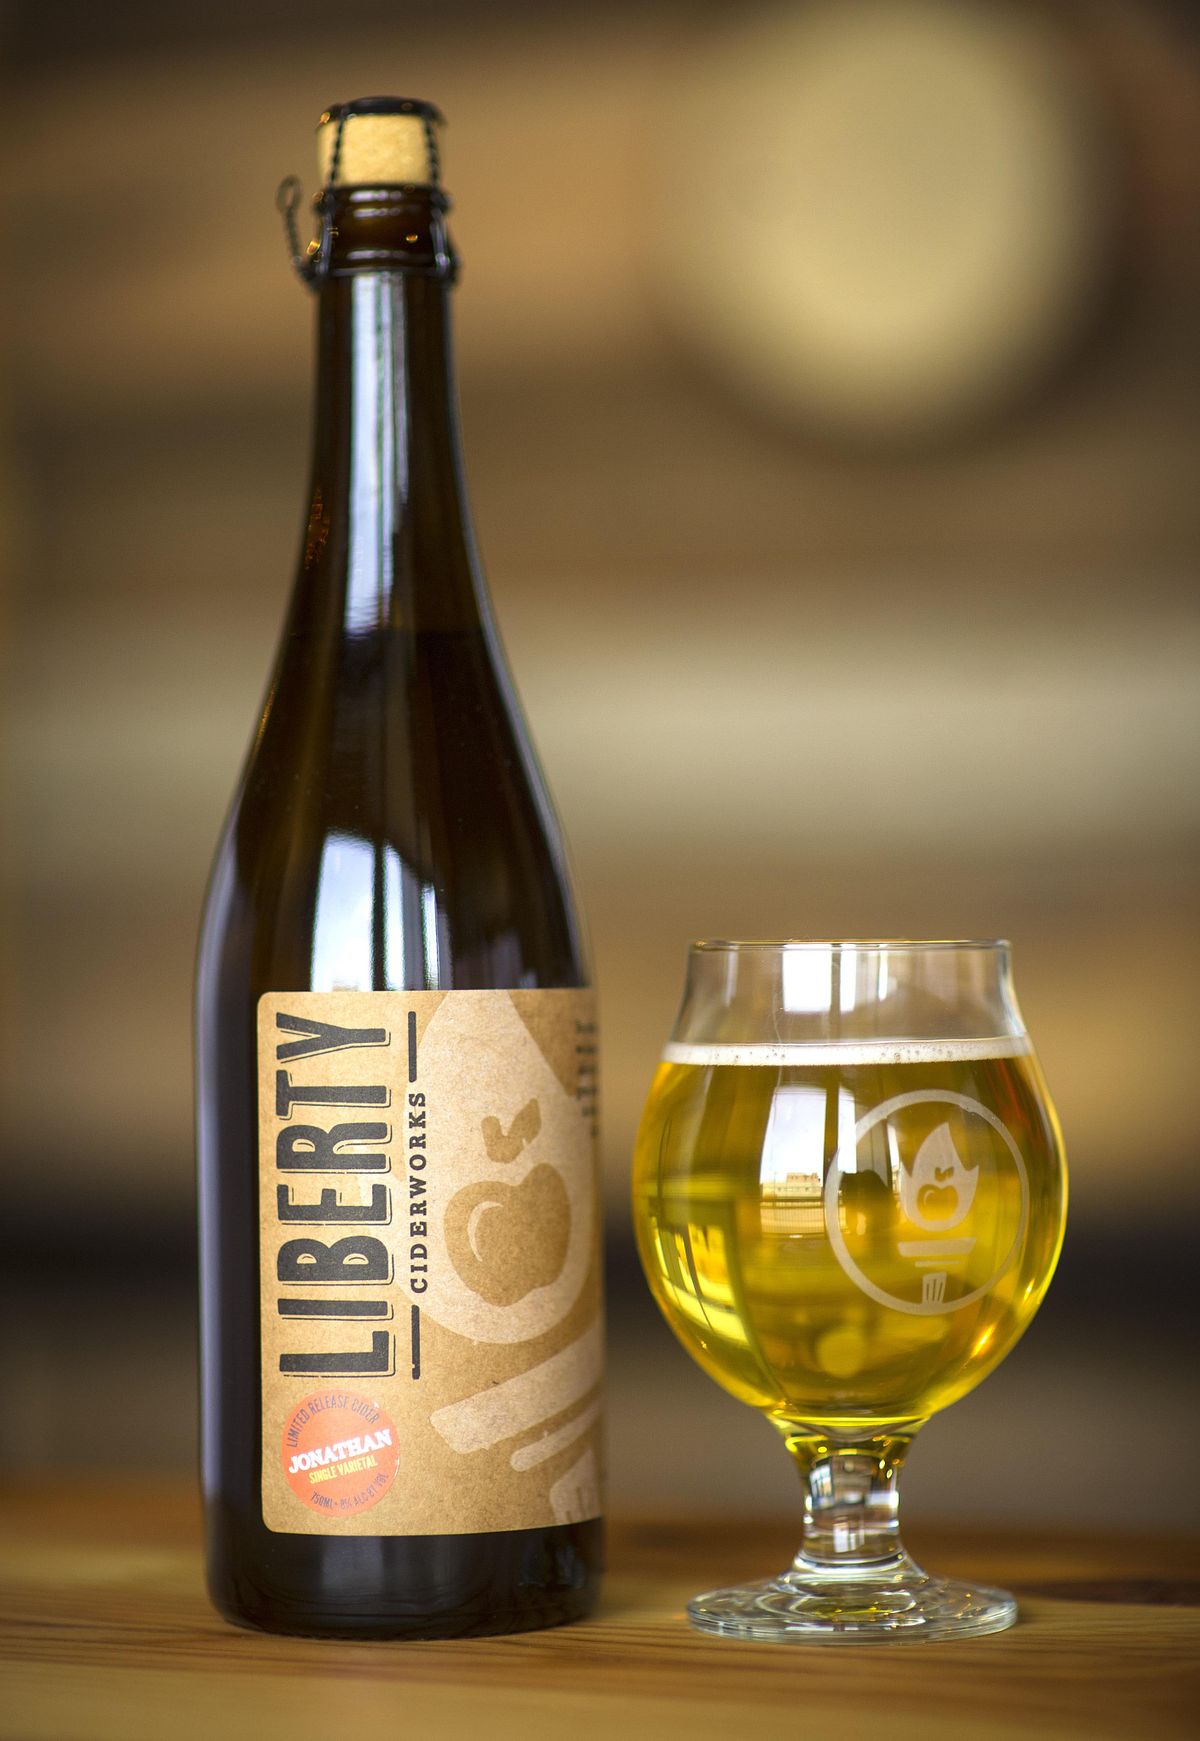 Liberty Ciderworks limited release Jonathan Single Varietal. Jonathan apples in a single-varietal cider delivers fresh apple aromatics and characteristic citrus-like overtones. (Colin Mulvany / The Spokesman-Review)